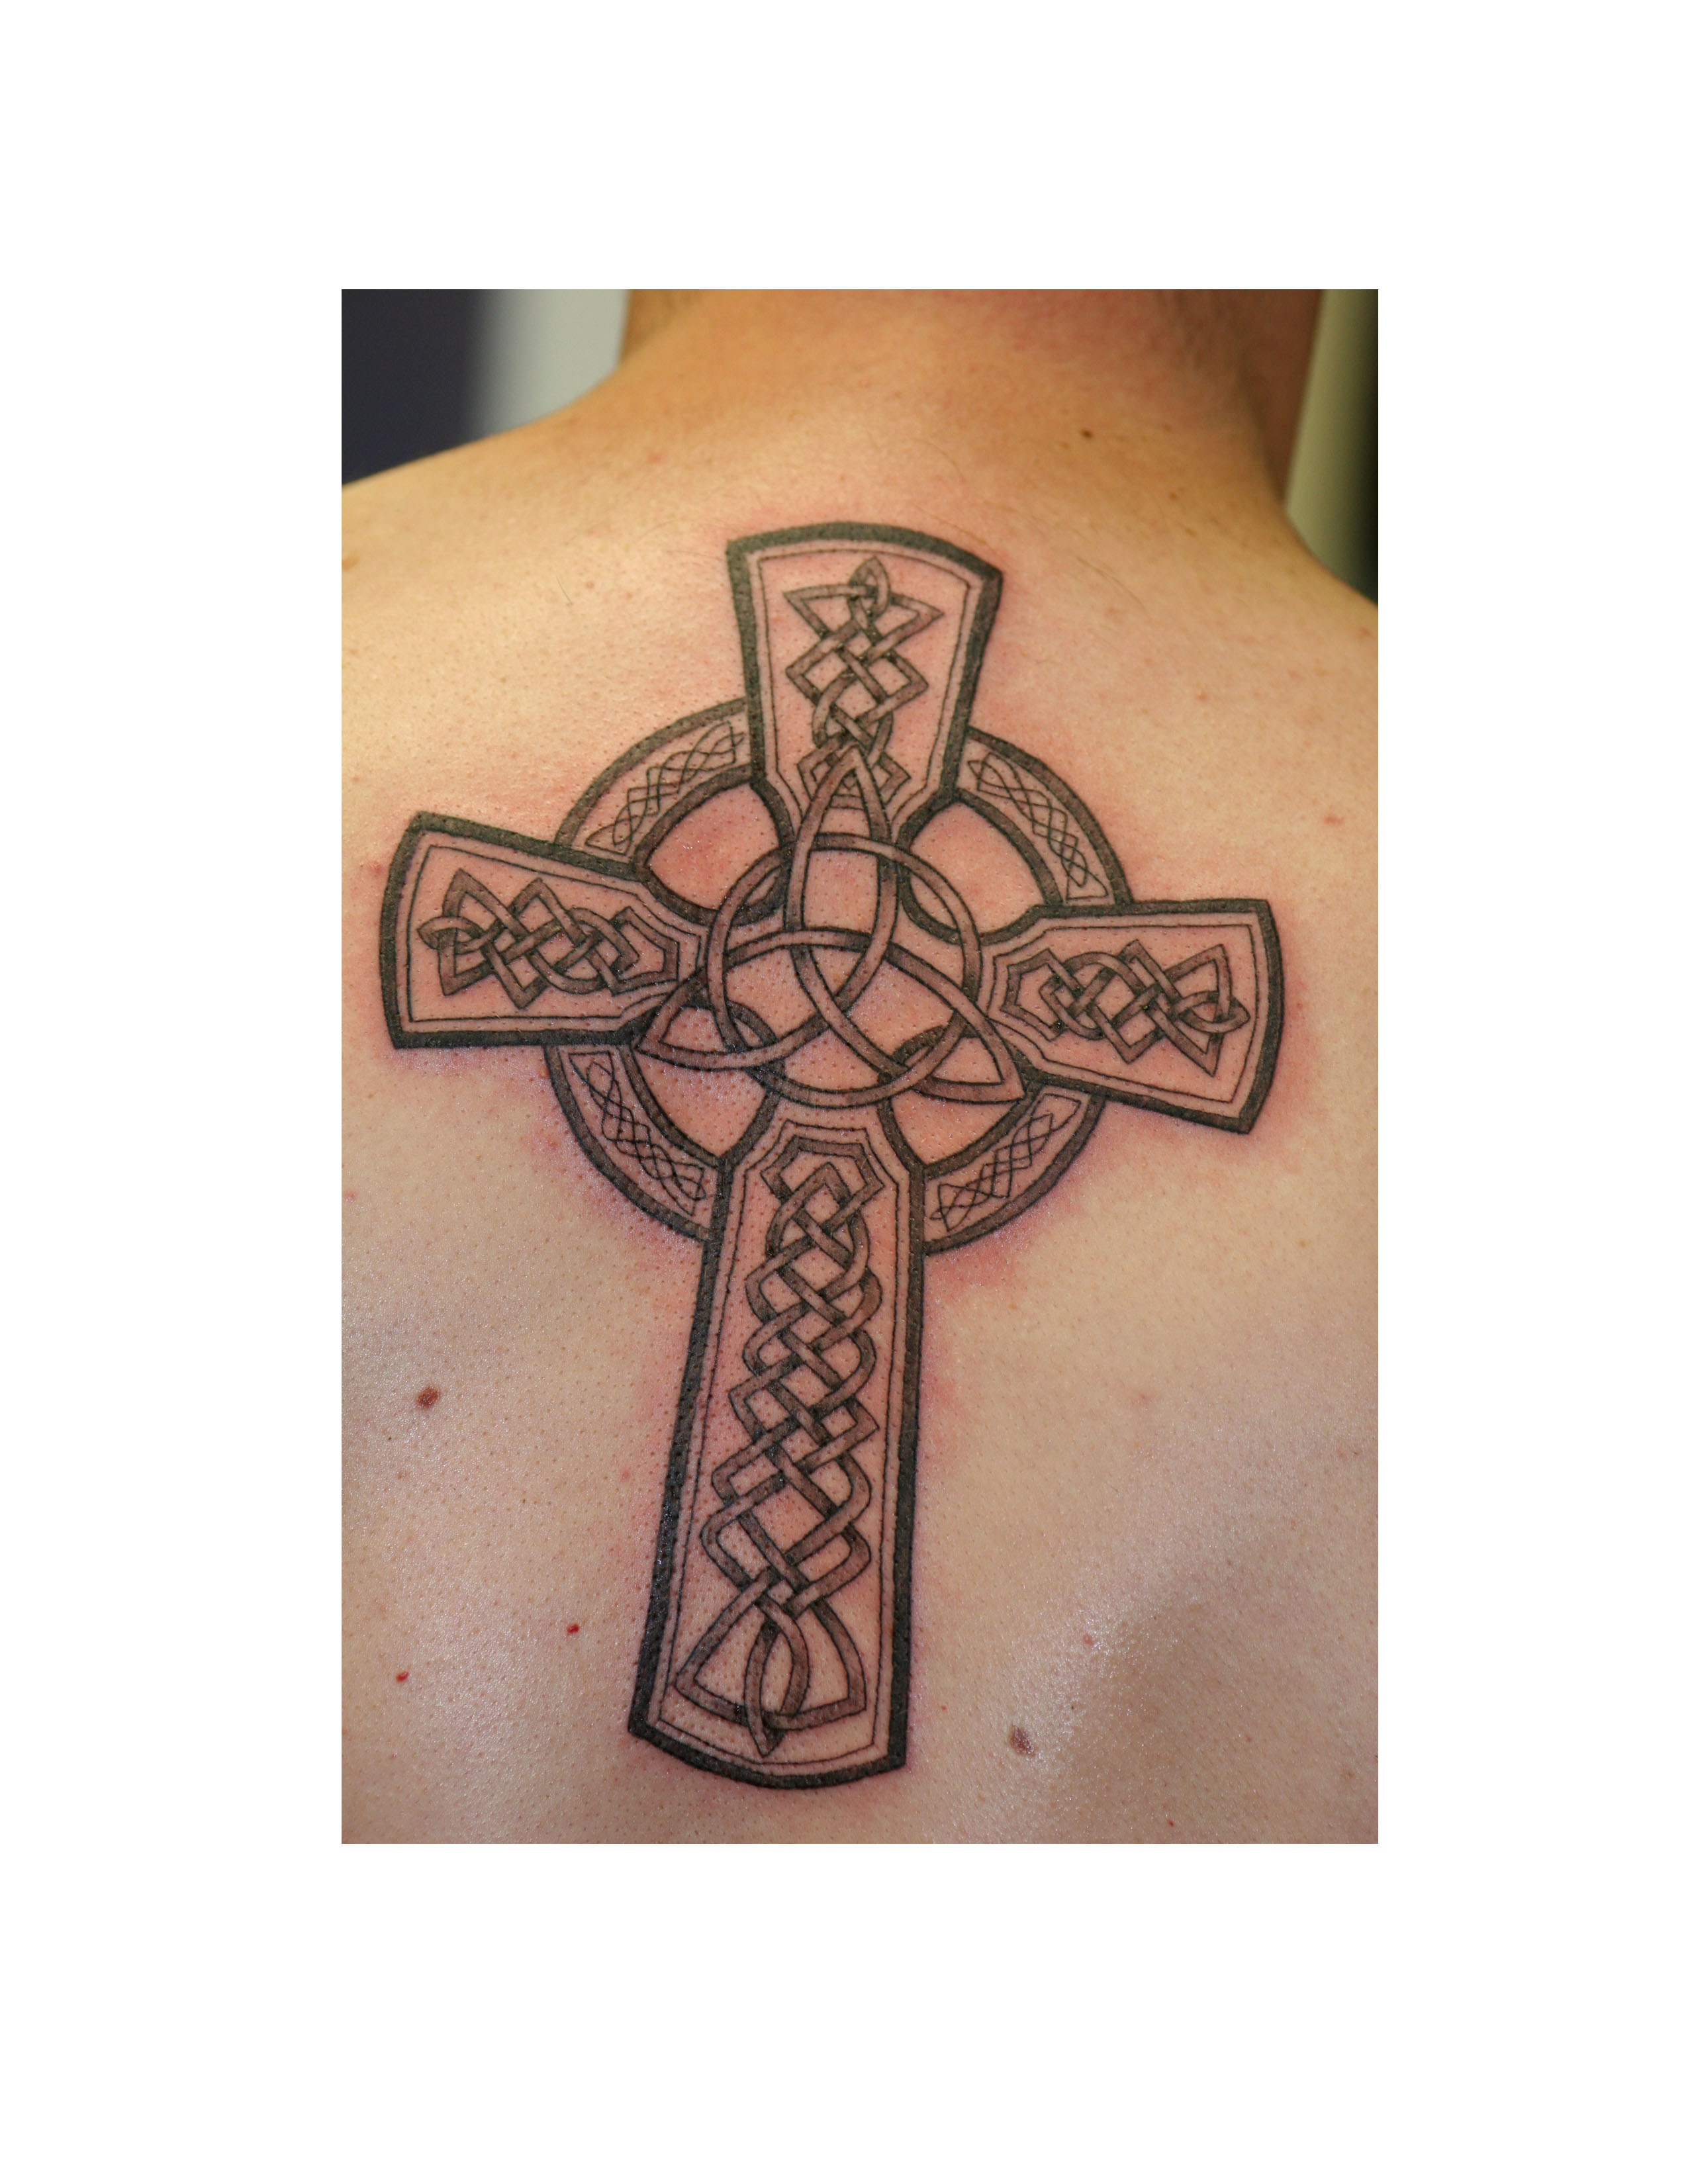 How to Draw a Simple Celtic Cross Tattoo Design - YouTube